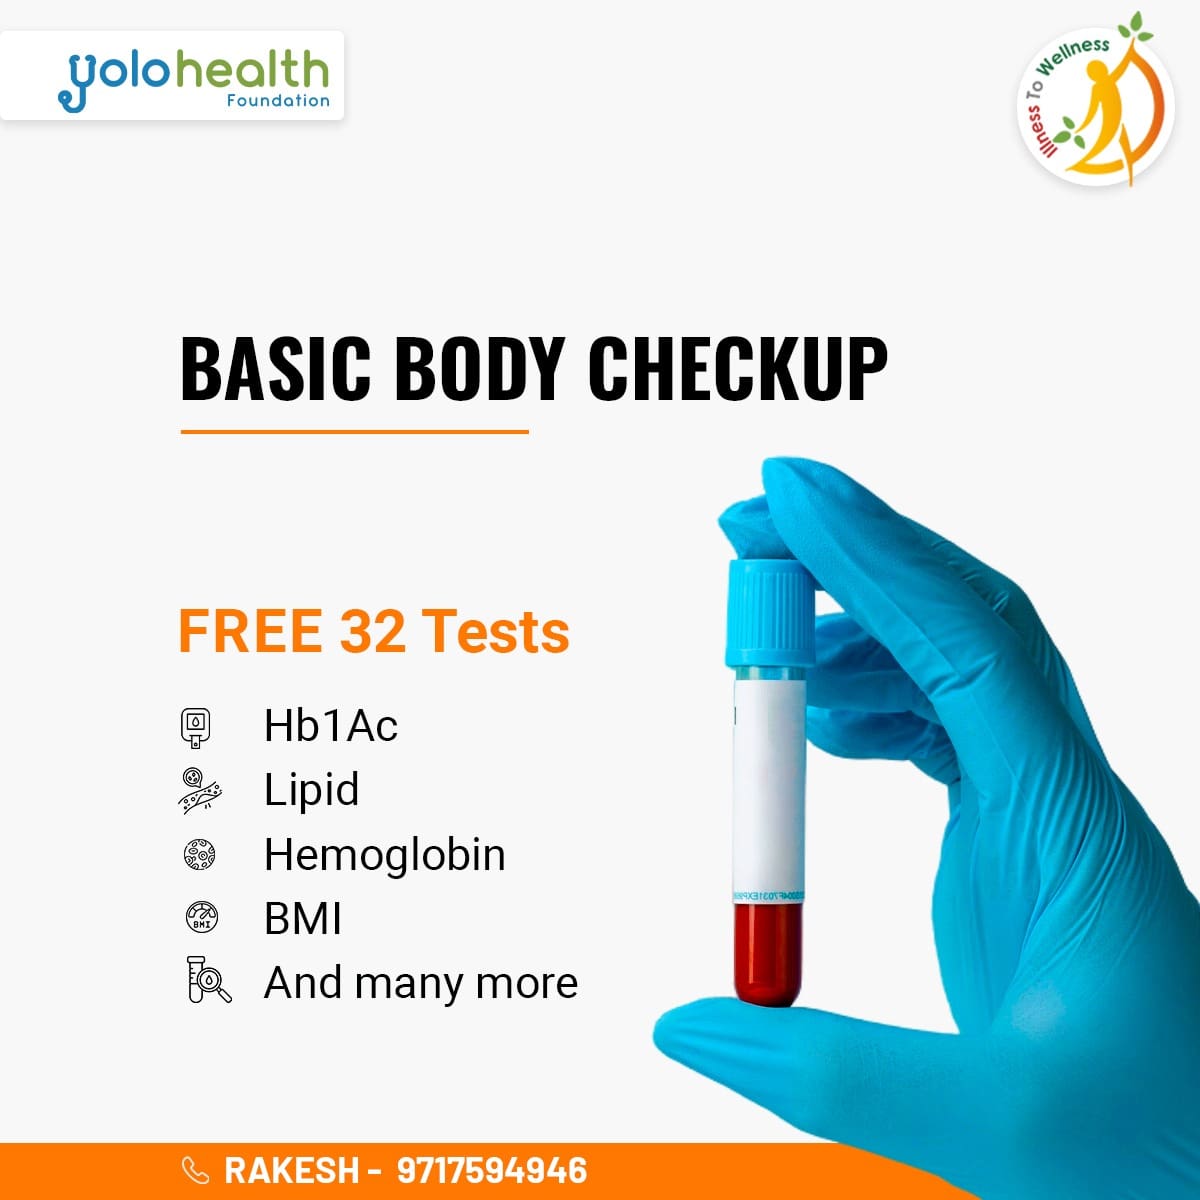 Prioritize your well-being! 
Avail a comprehensive free body checkup featuring 32 tests like Hb 1Ac, Lipid, Hemoglobin, and BMI. At Aggarwal Digamber Jain Mandir, Connaught Place, New Delhi, 10 Am Onwards. Presented by @YoloHealth_In and @itwsays

#HealthCamp #HealthAwareness